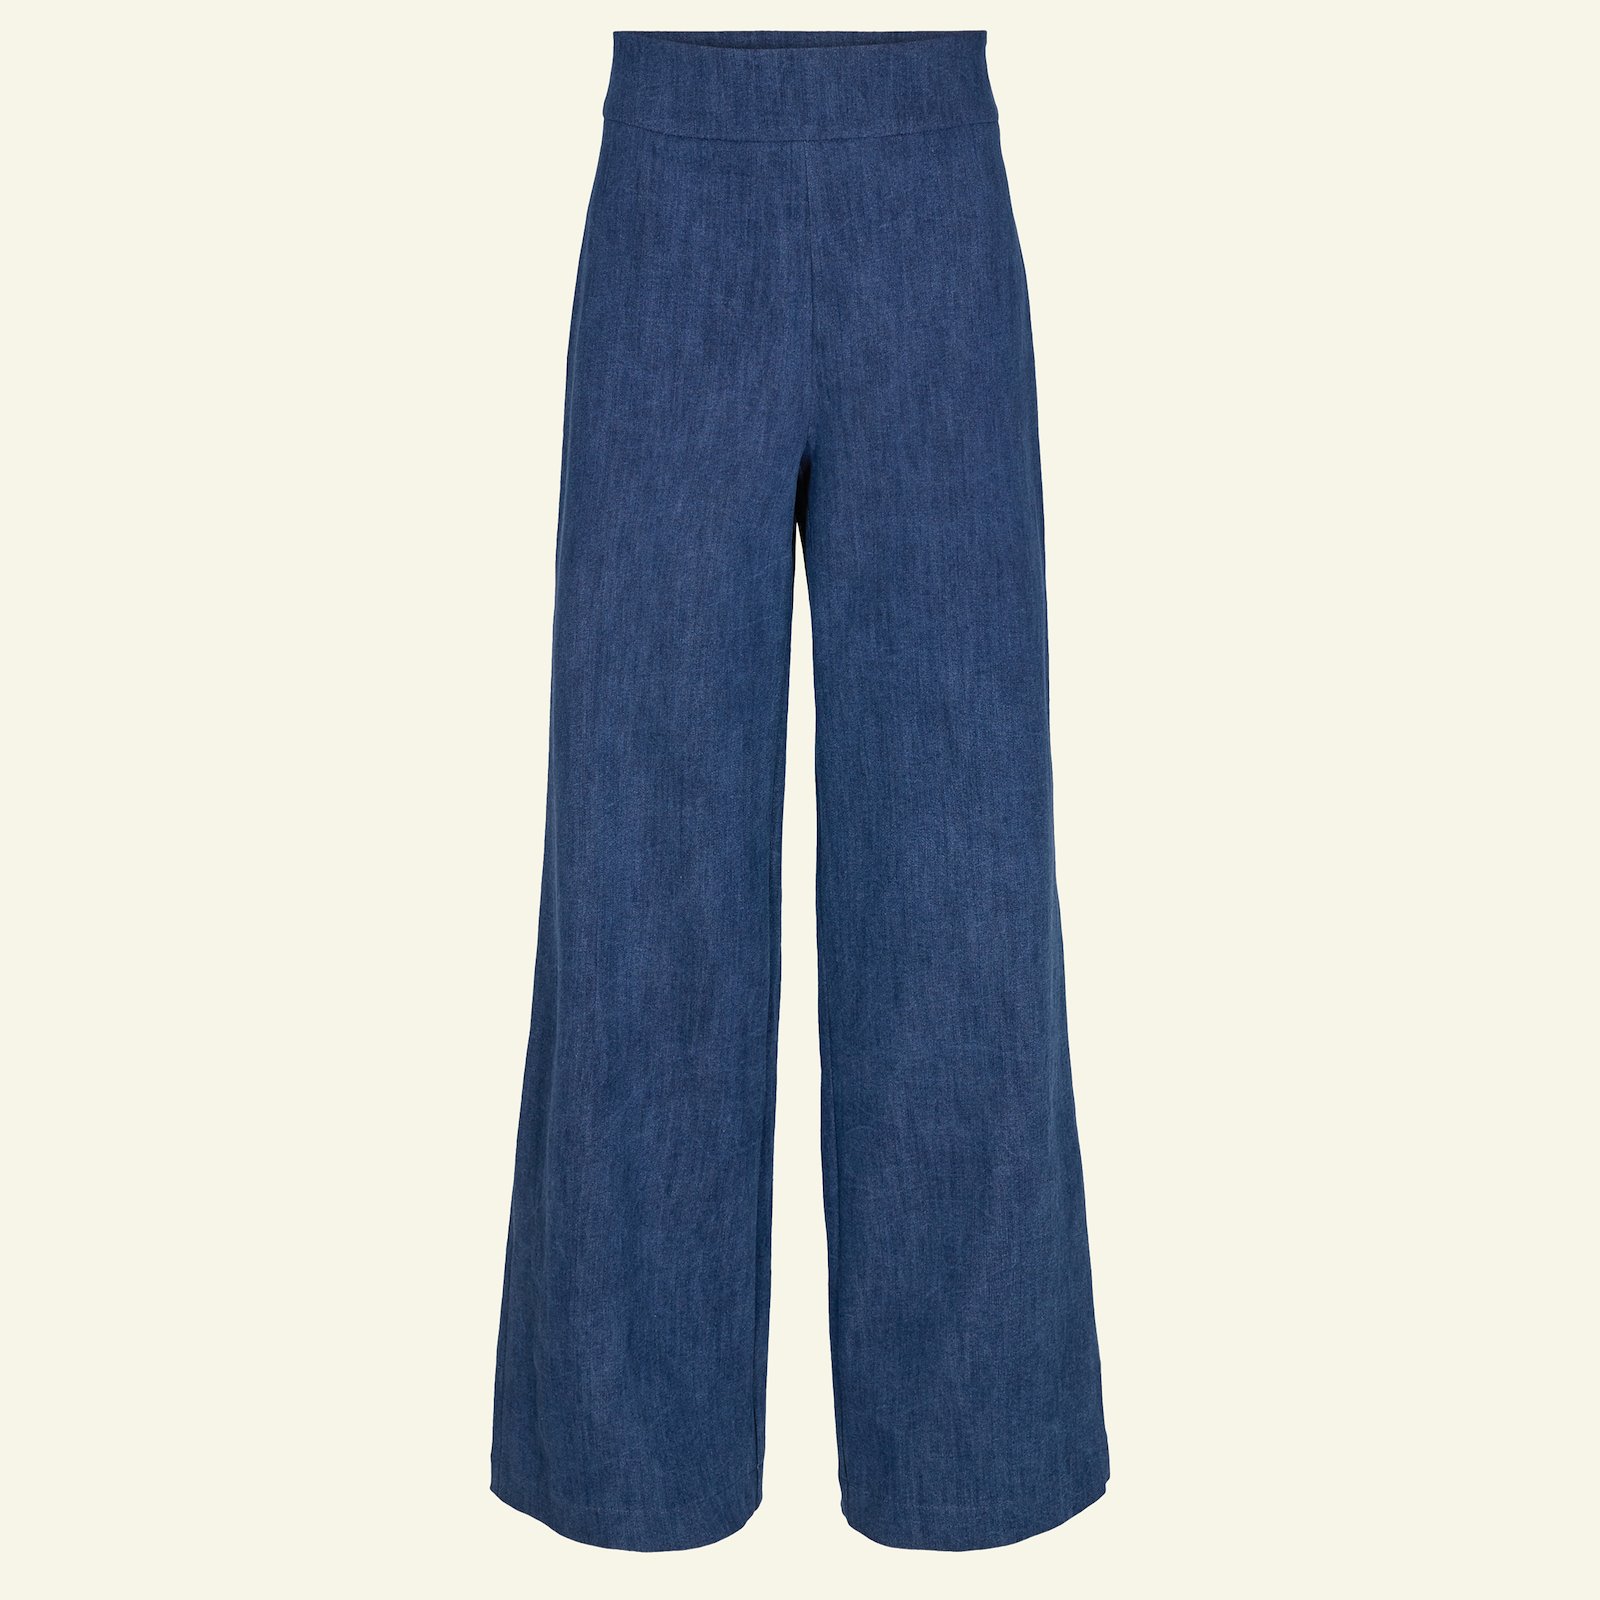 Highwaist and wide legs trousers, 46/18 p20052_460851_sskit